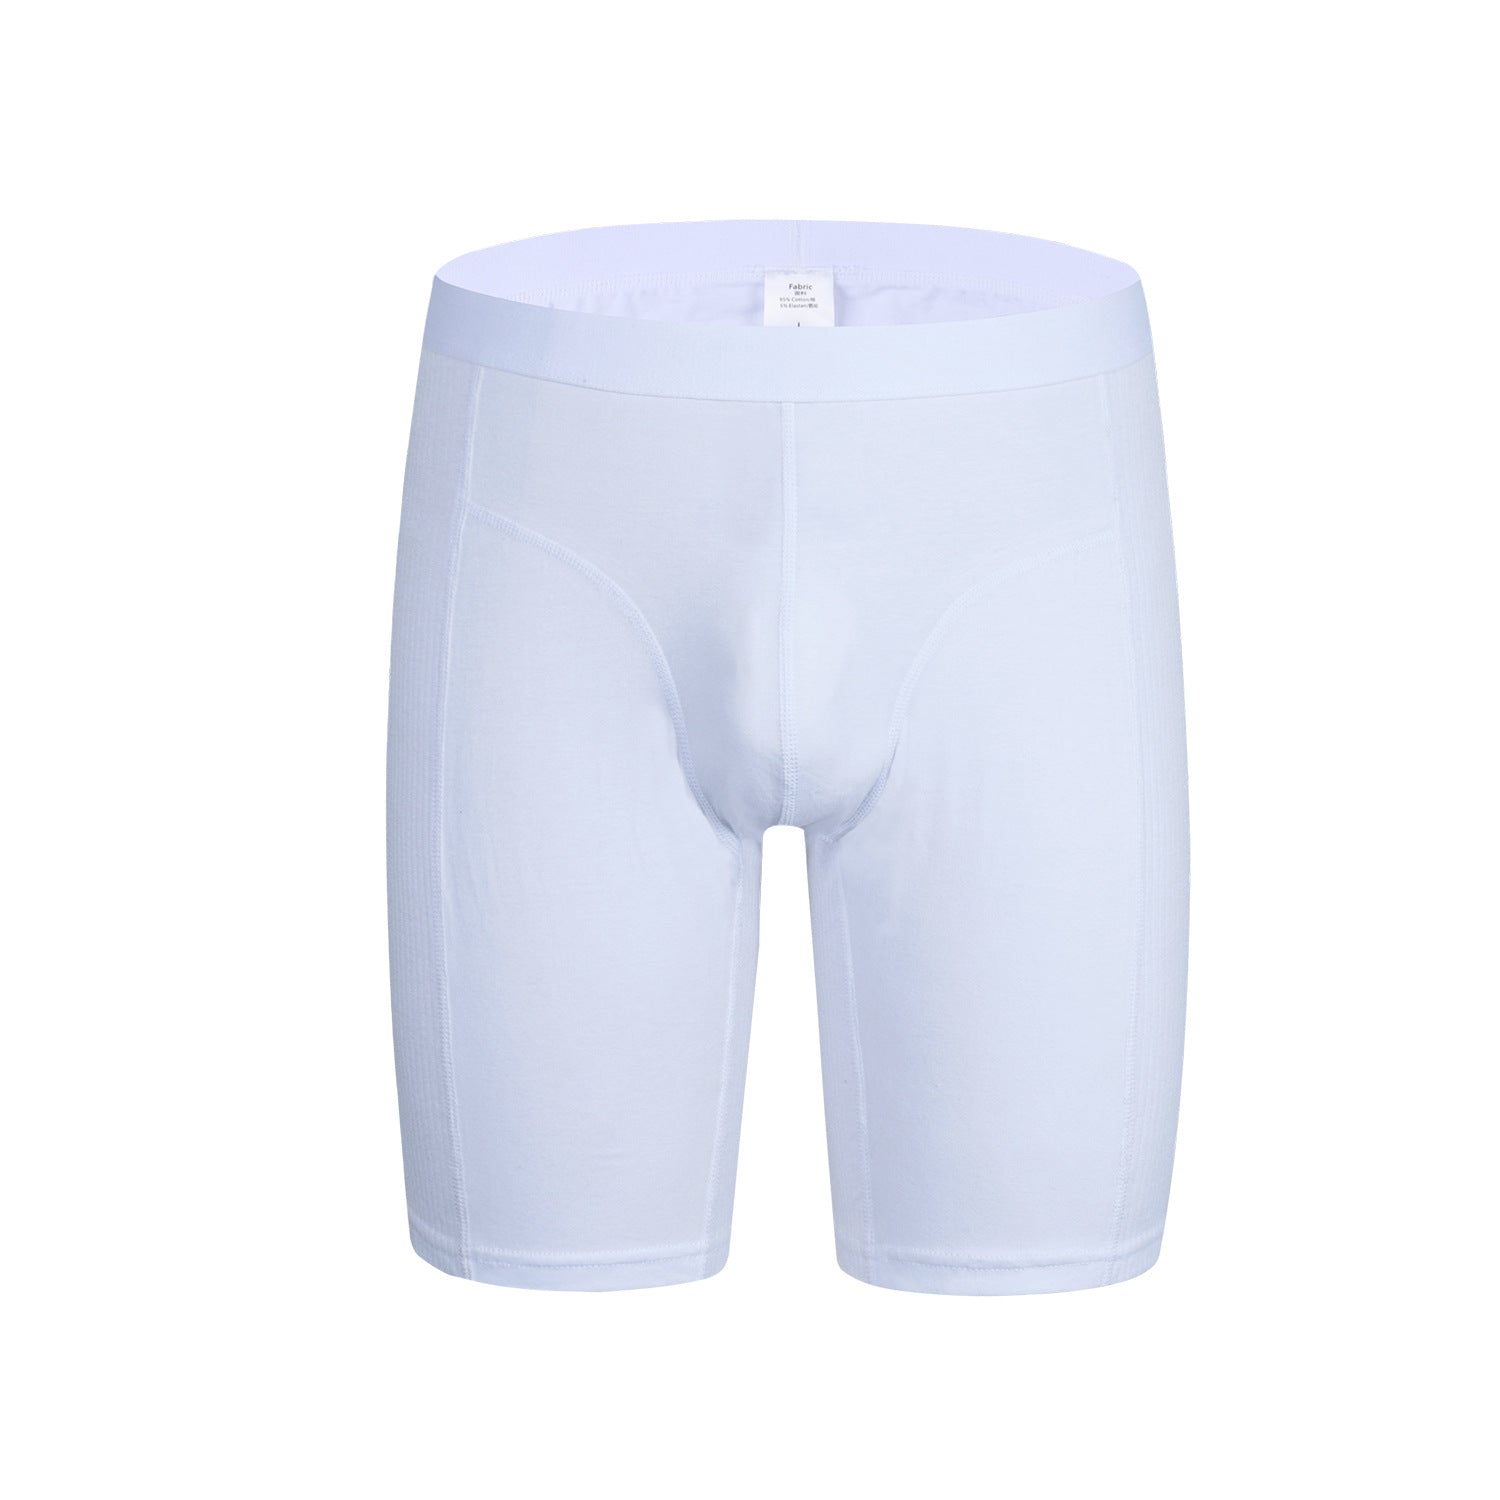 Men's Sports Boxer Brief Fly Front with Pouch